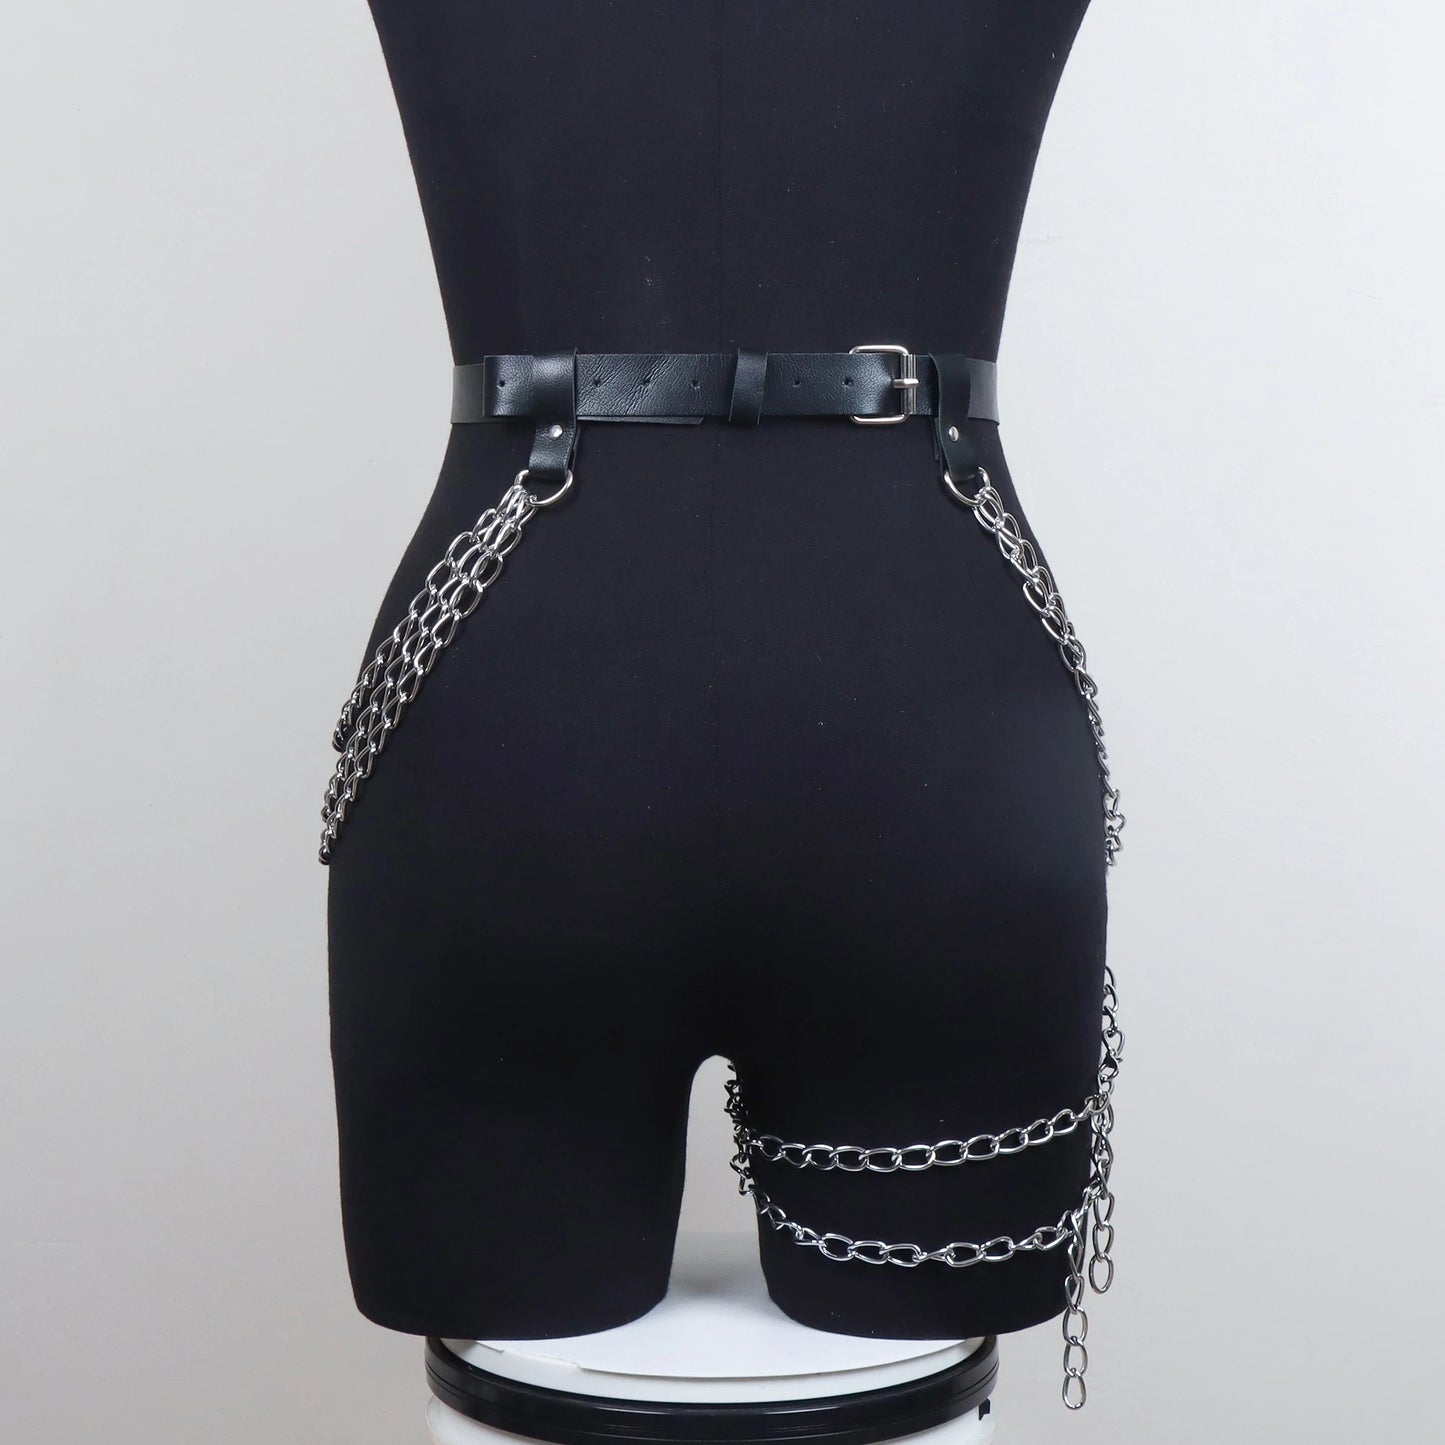 Phantom Veil Thigh Harness | Veil in Mystery, Adorn in Darkness - A Gothic Universe - Belts